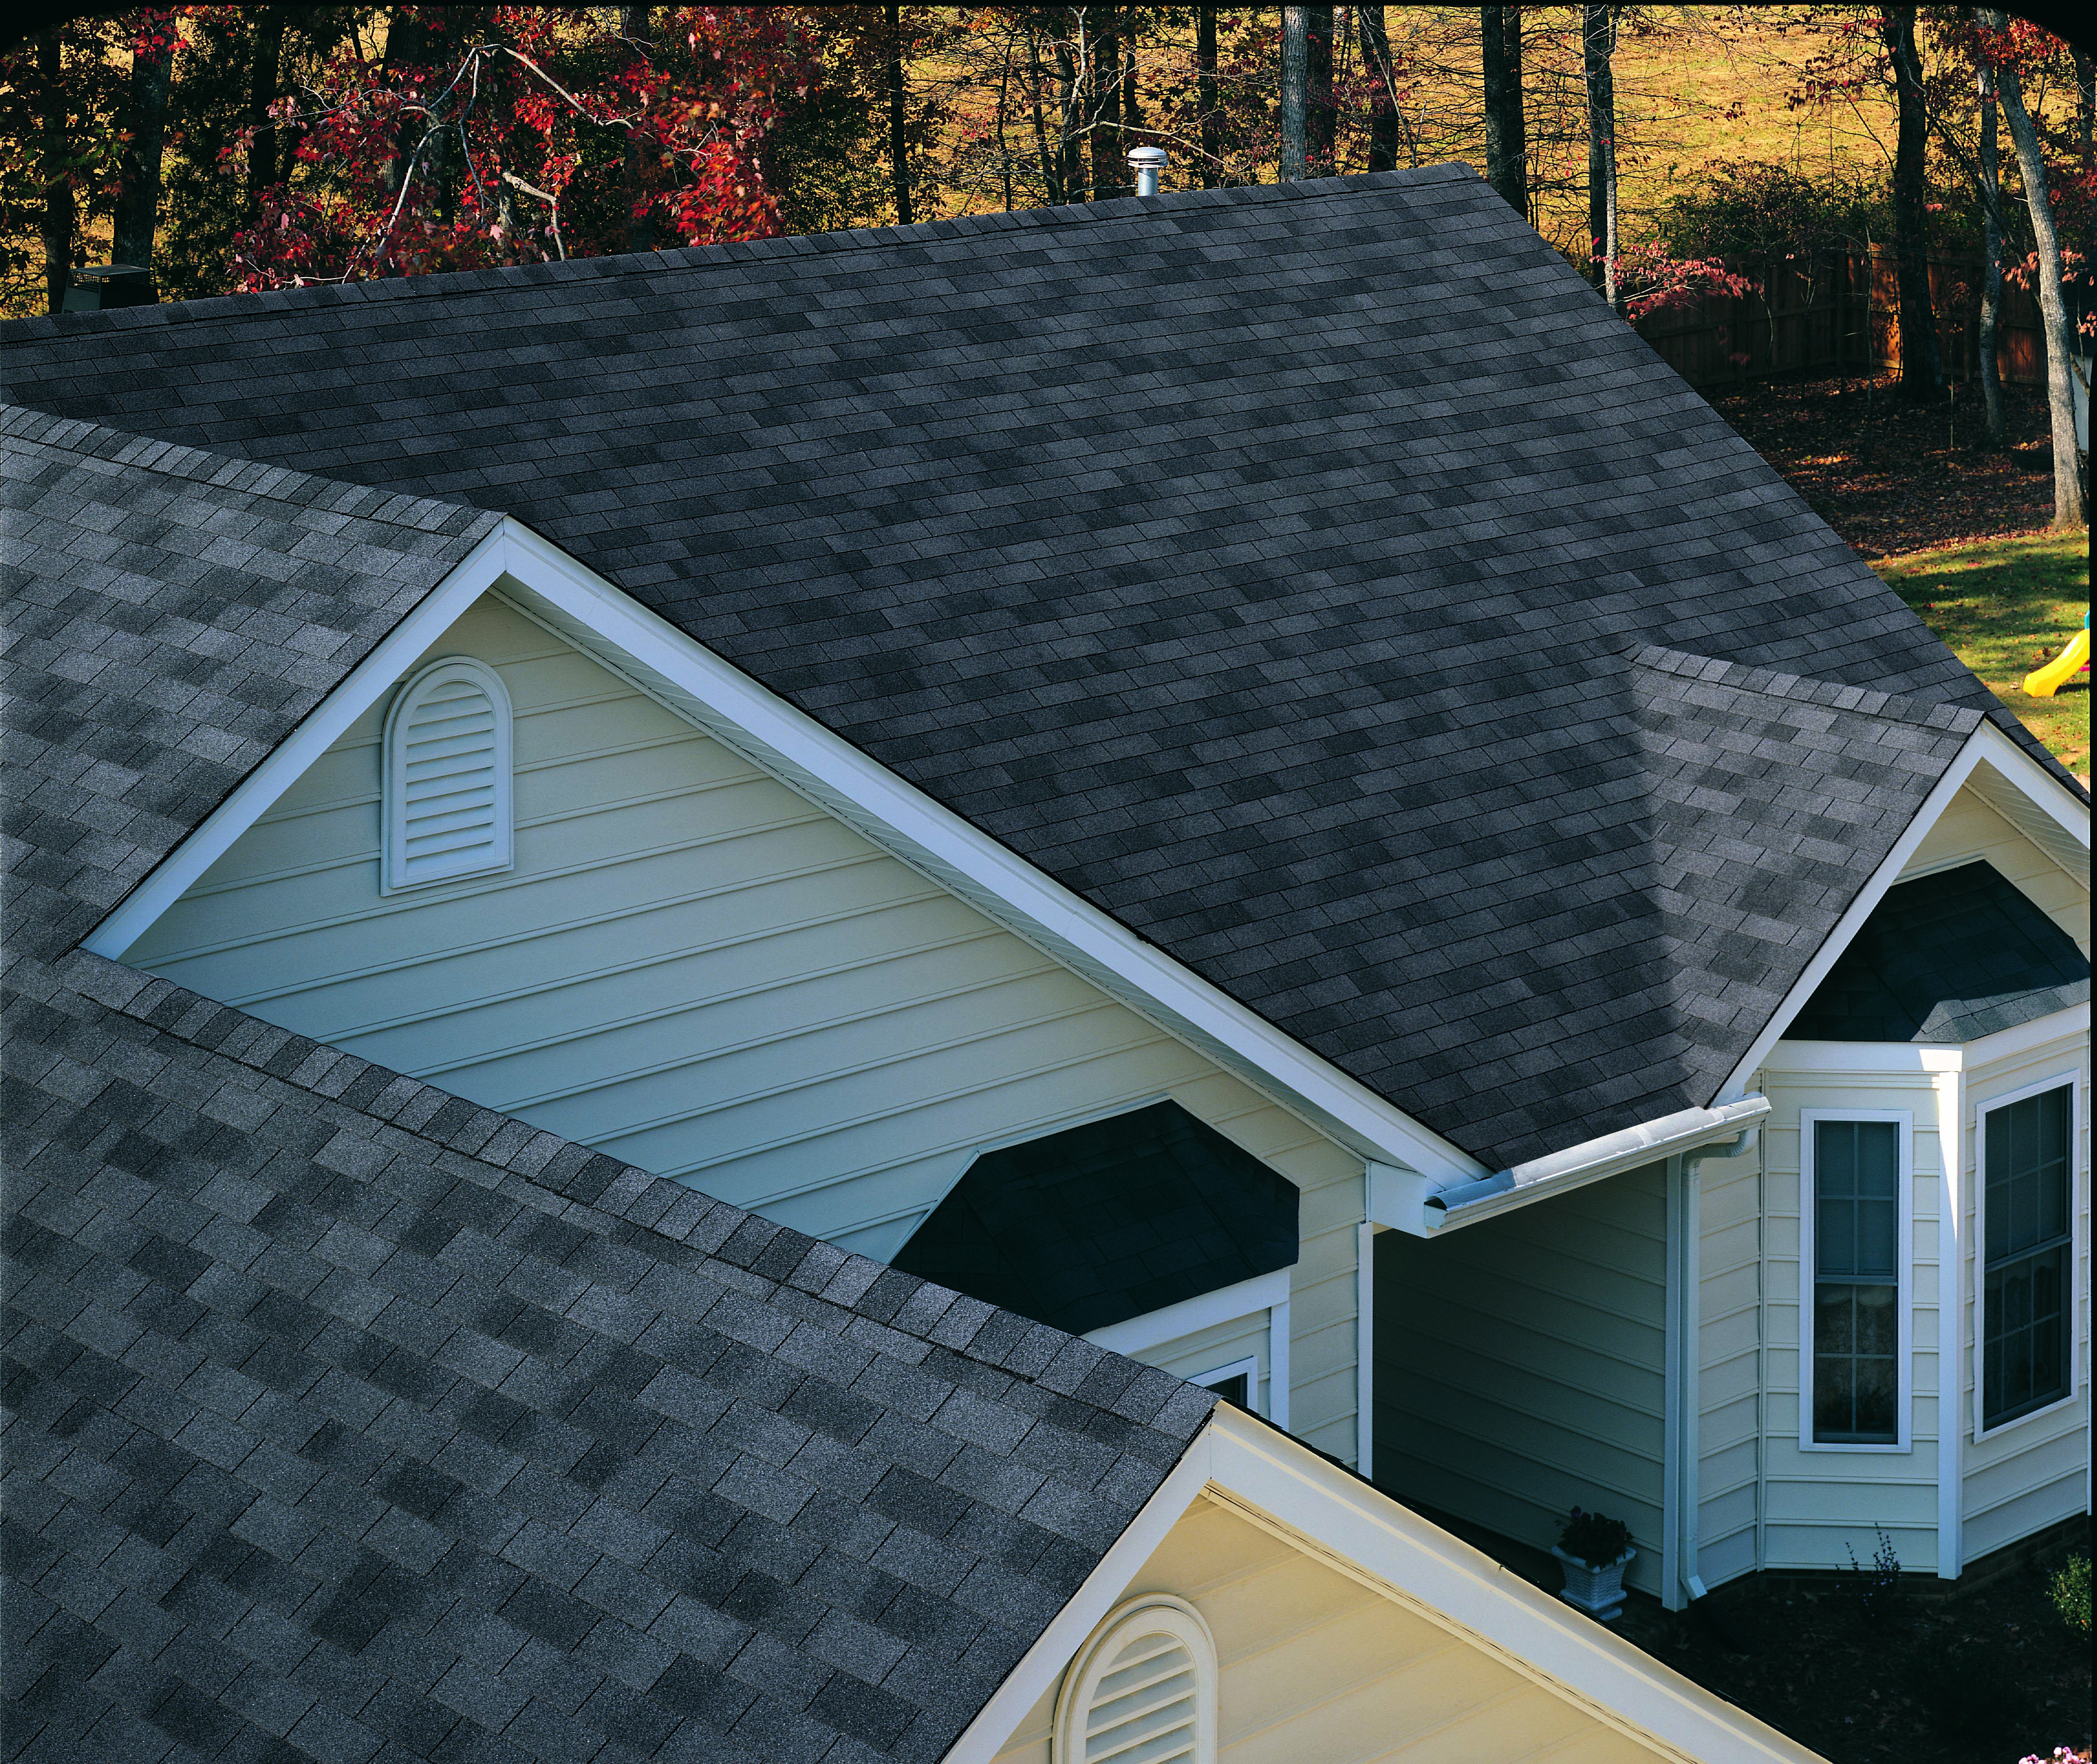 miore black roofing shingles